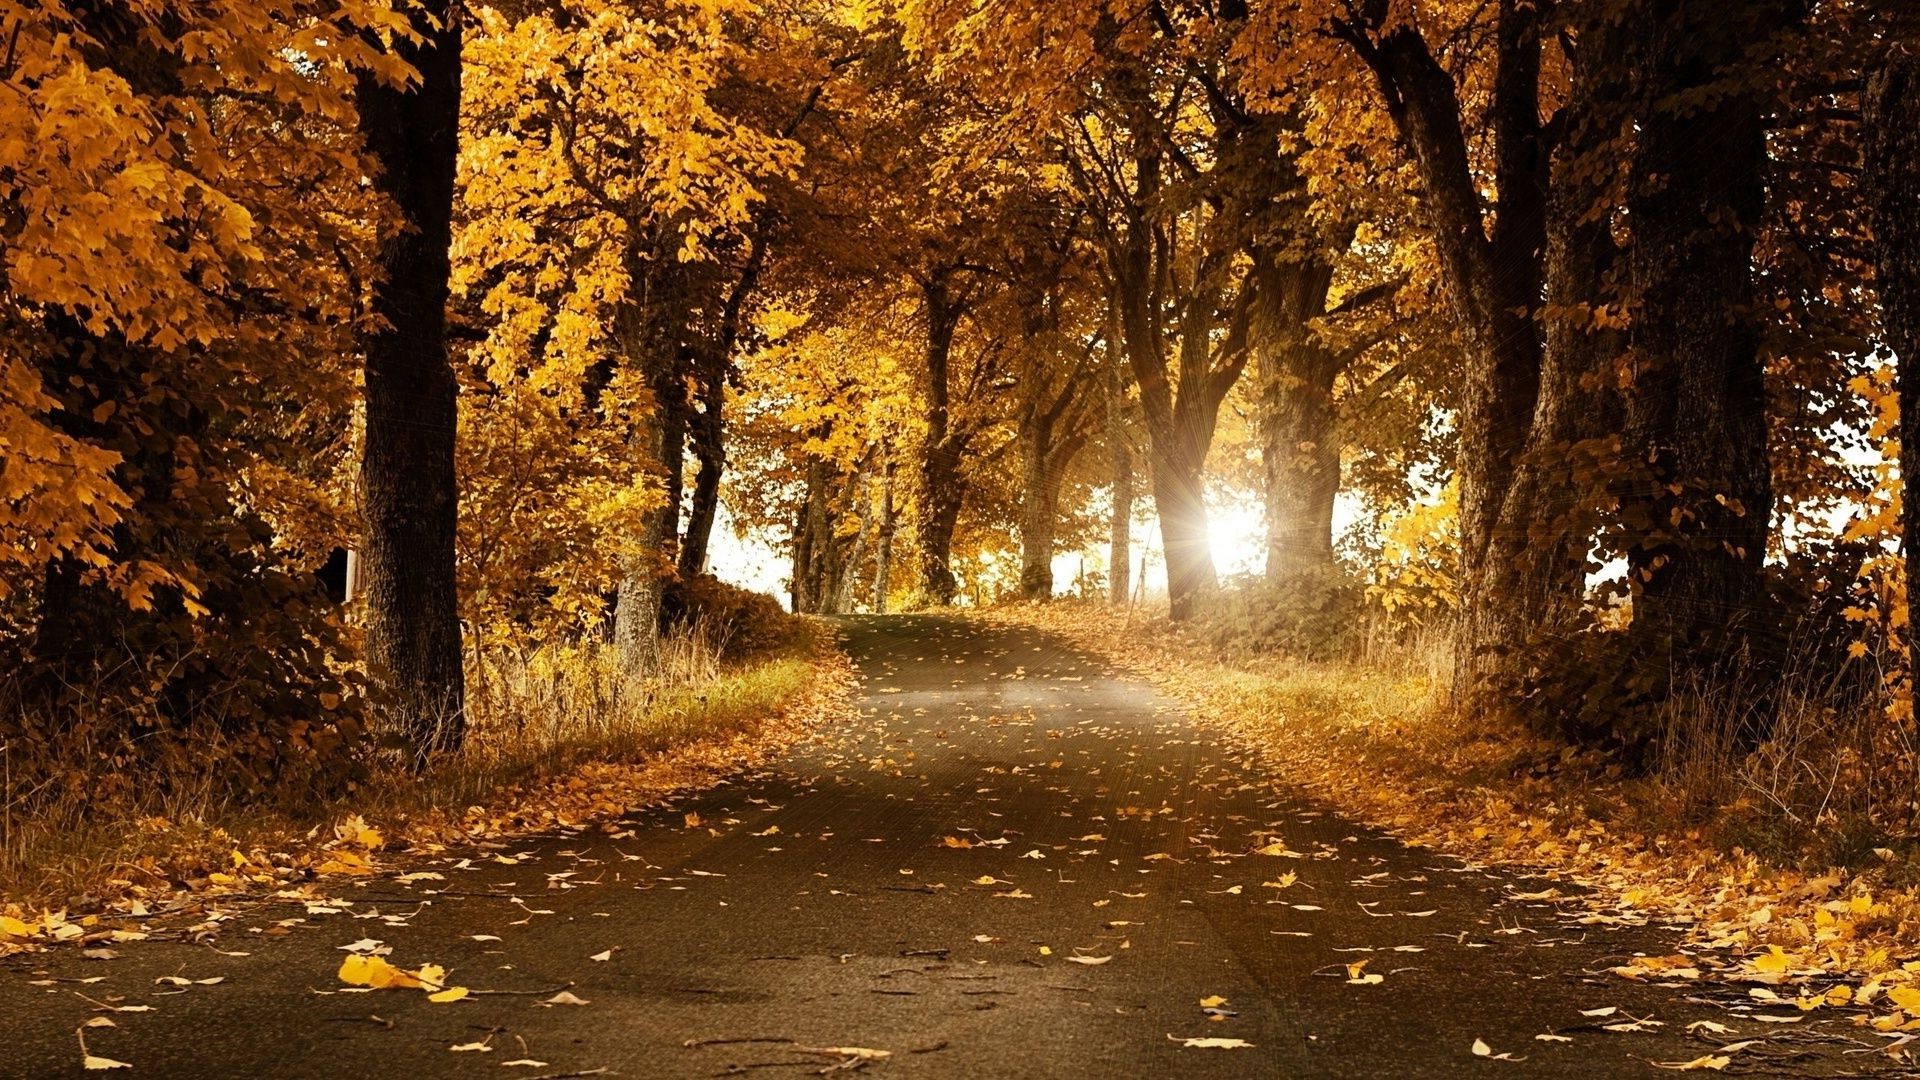 the sunset and sunrise fall leaf tree road wood landscape park nature guidance outdoors alley mist fog dawn gold